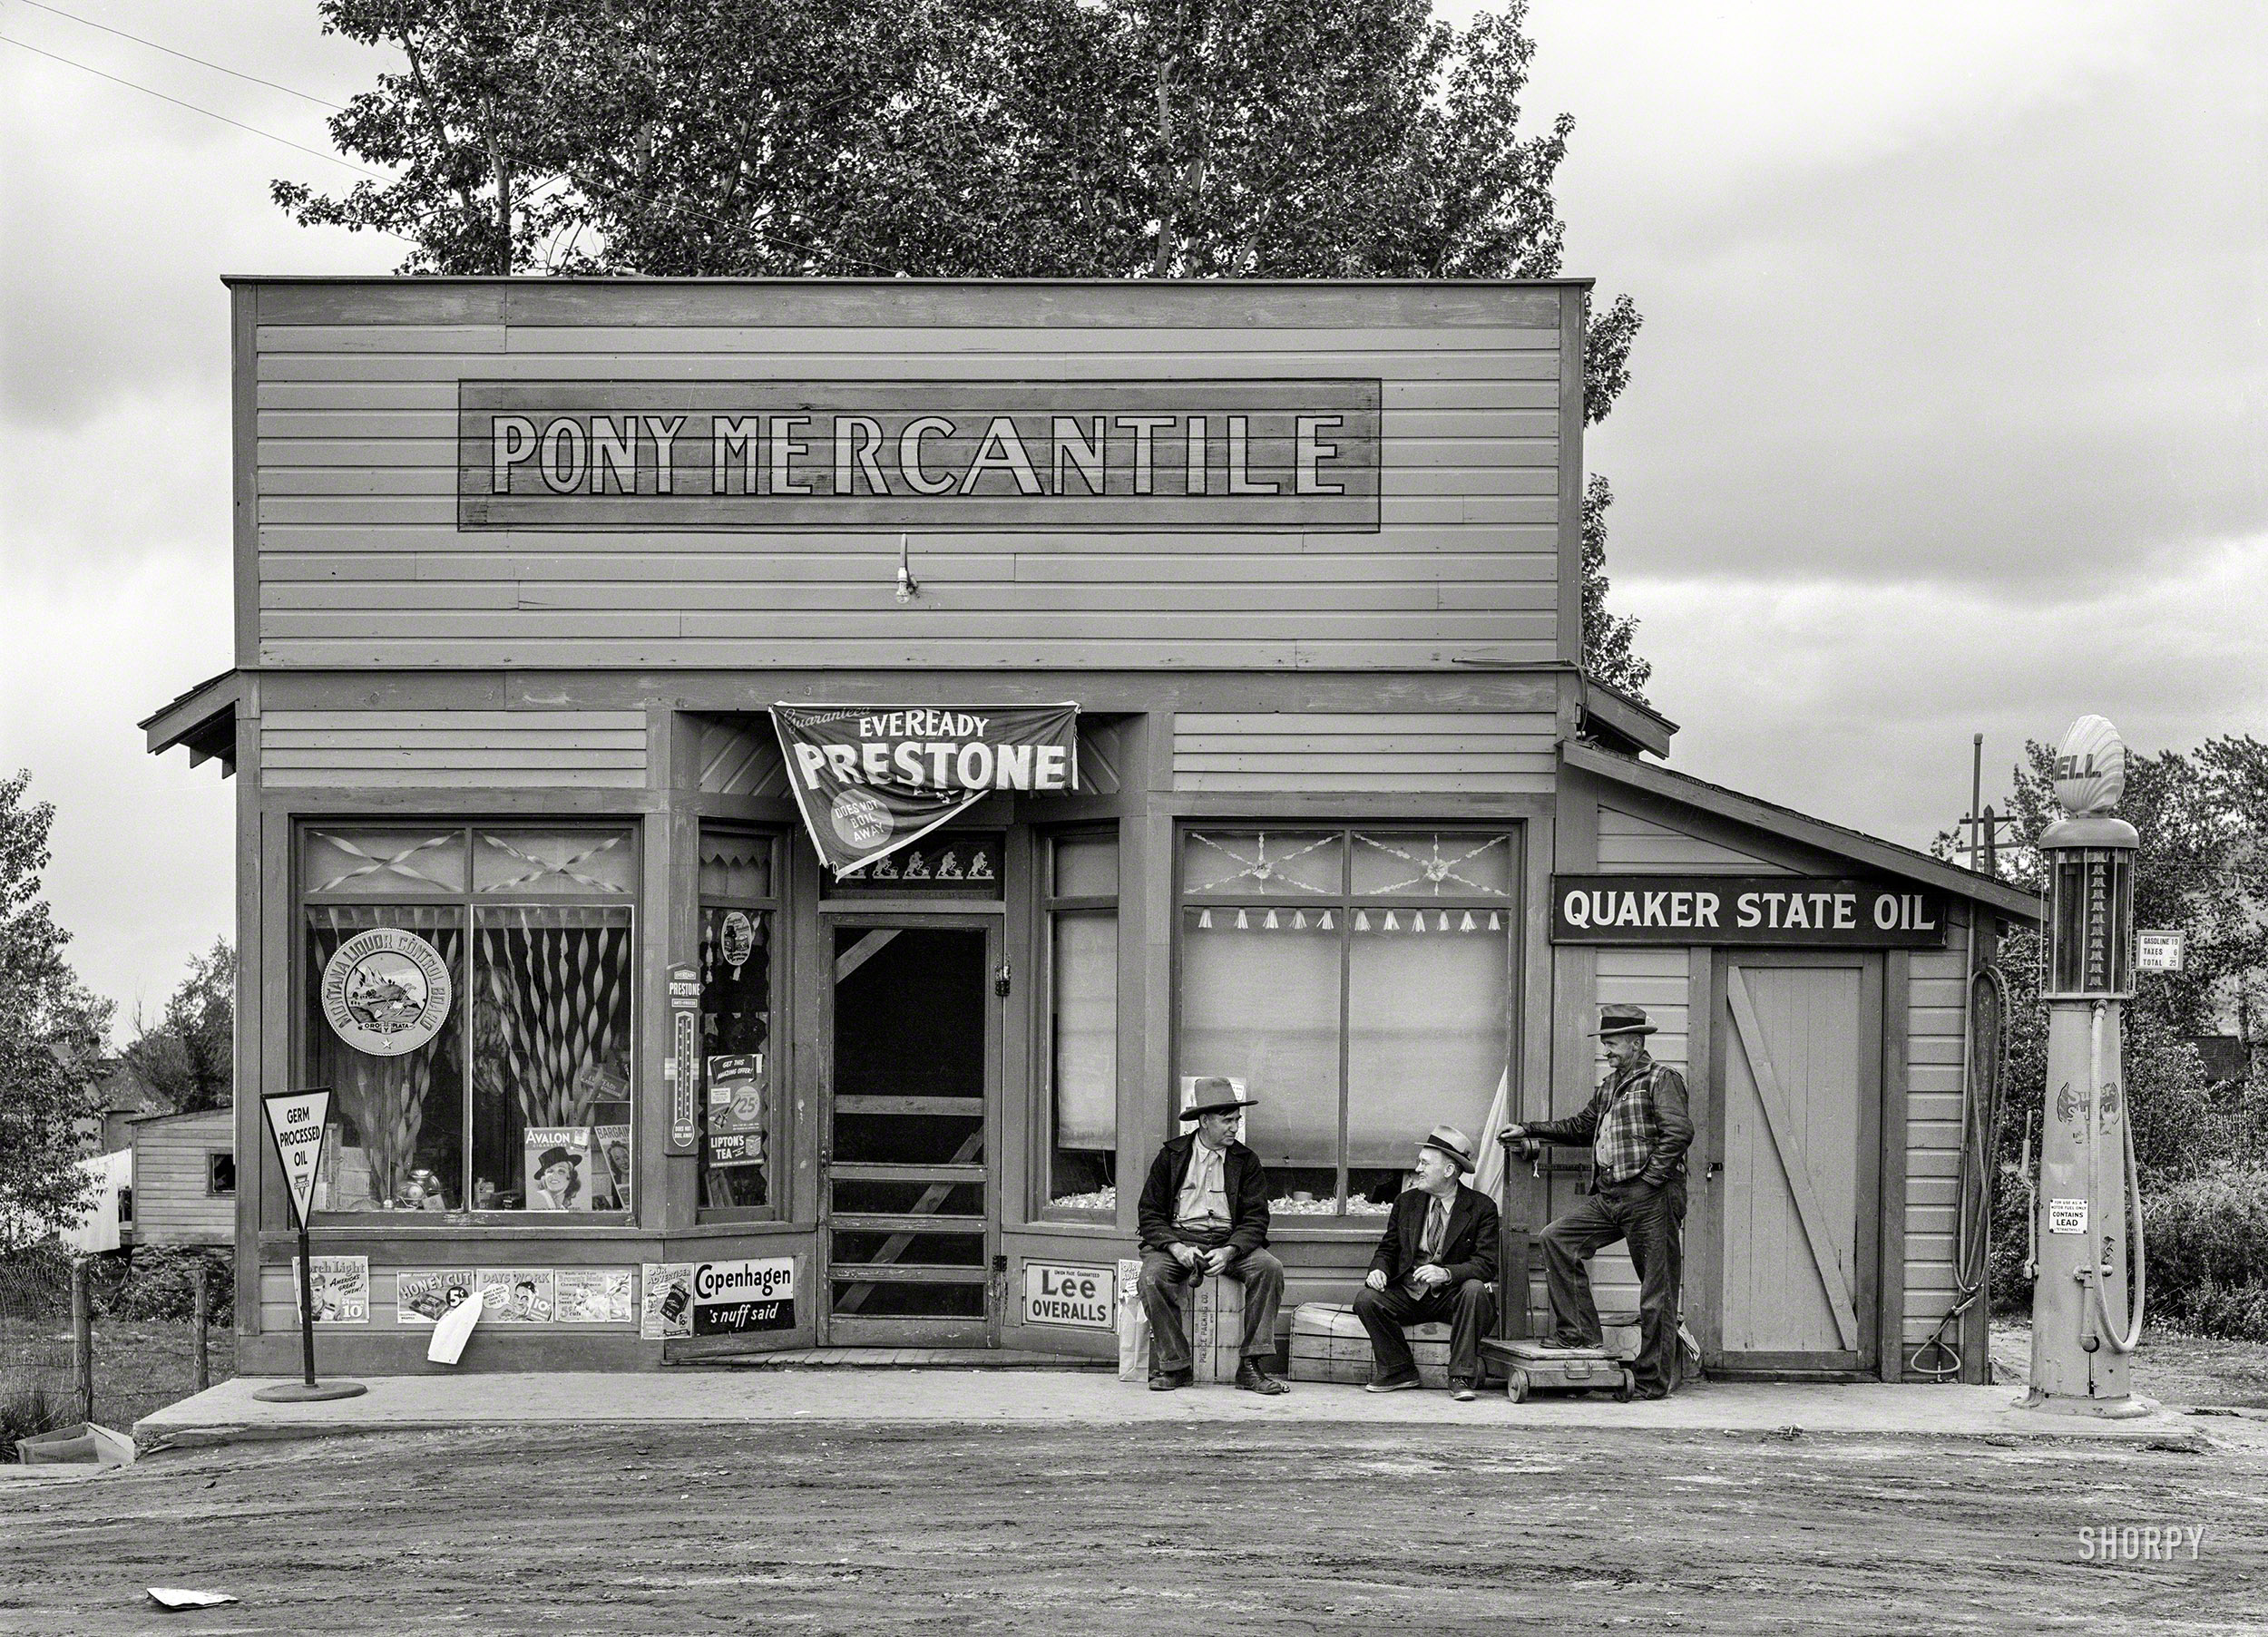 June 1939. "General store in Pony, Montana." Back when the brands on stallions, bulls and heifers migrated to the gas station. Medium format negative by Arthur Rothstein for the Farm Security Administration. View full size.